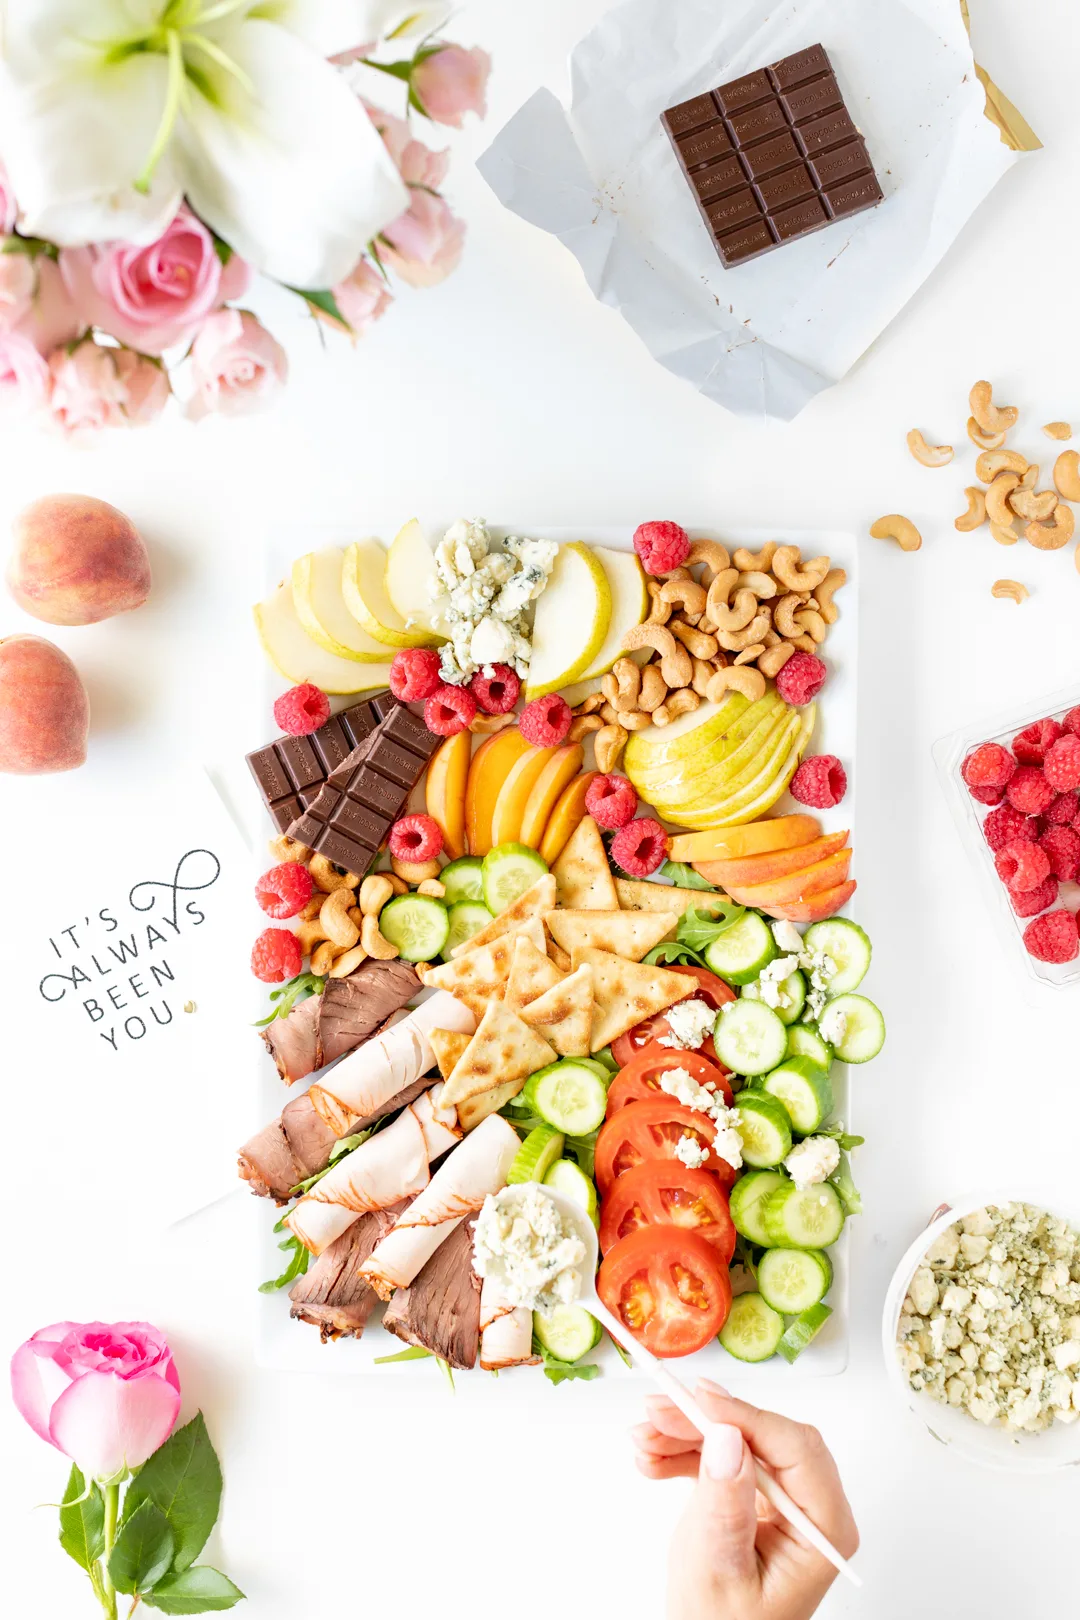 date night snack board with a variety of foods from pears, chocolate and raspberries.